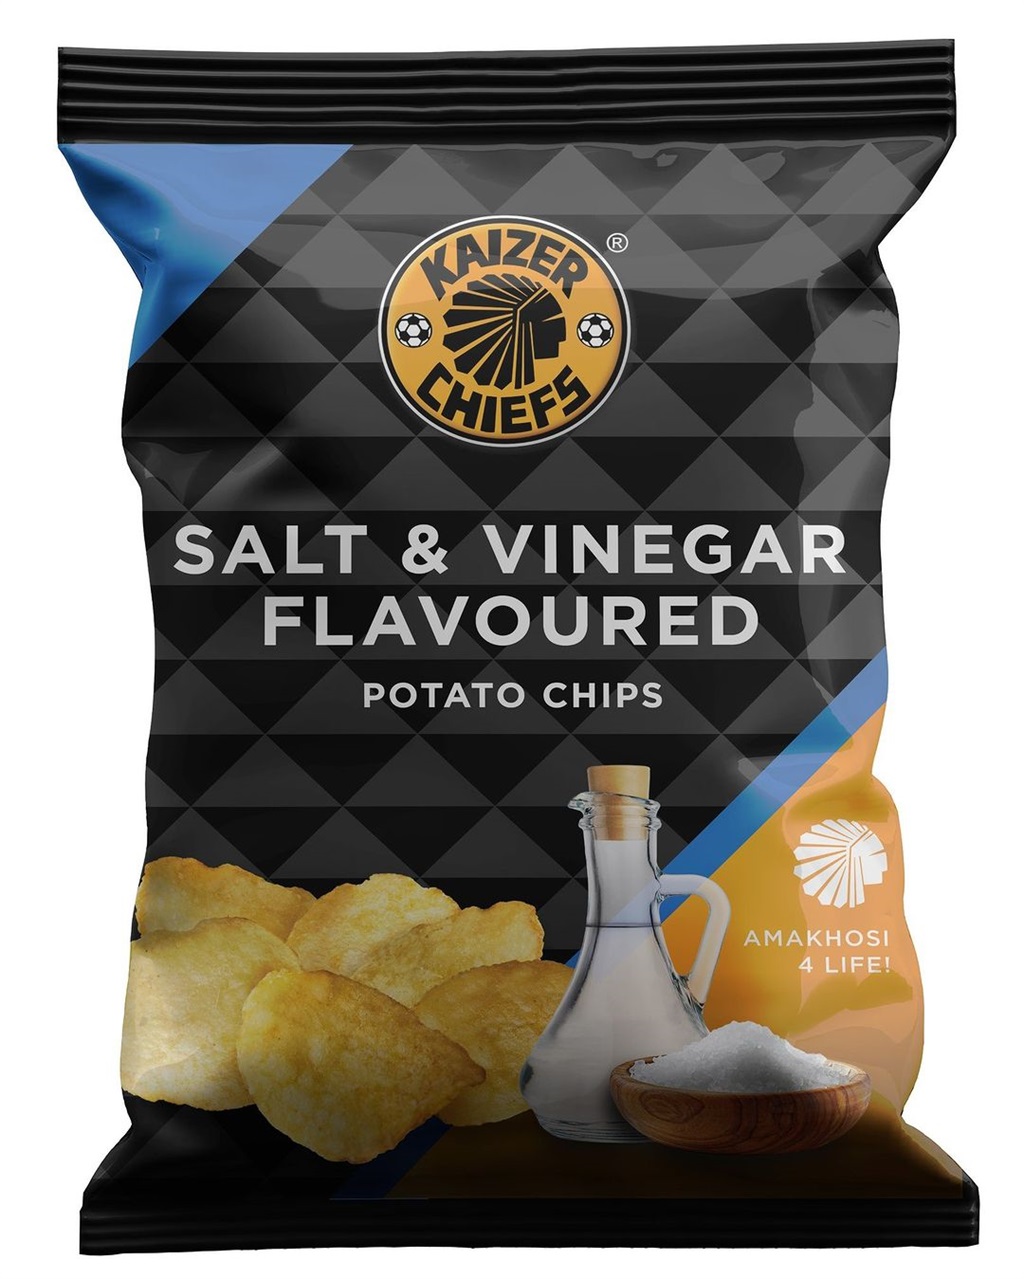 Kaizer Chiefs' snack range is produced by In2Food,